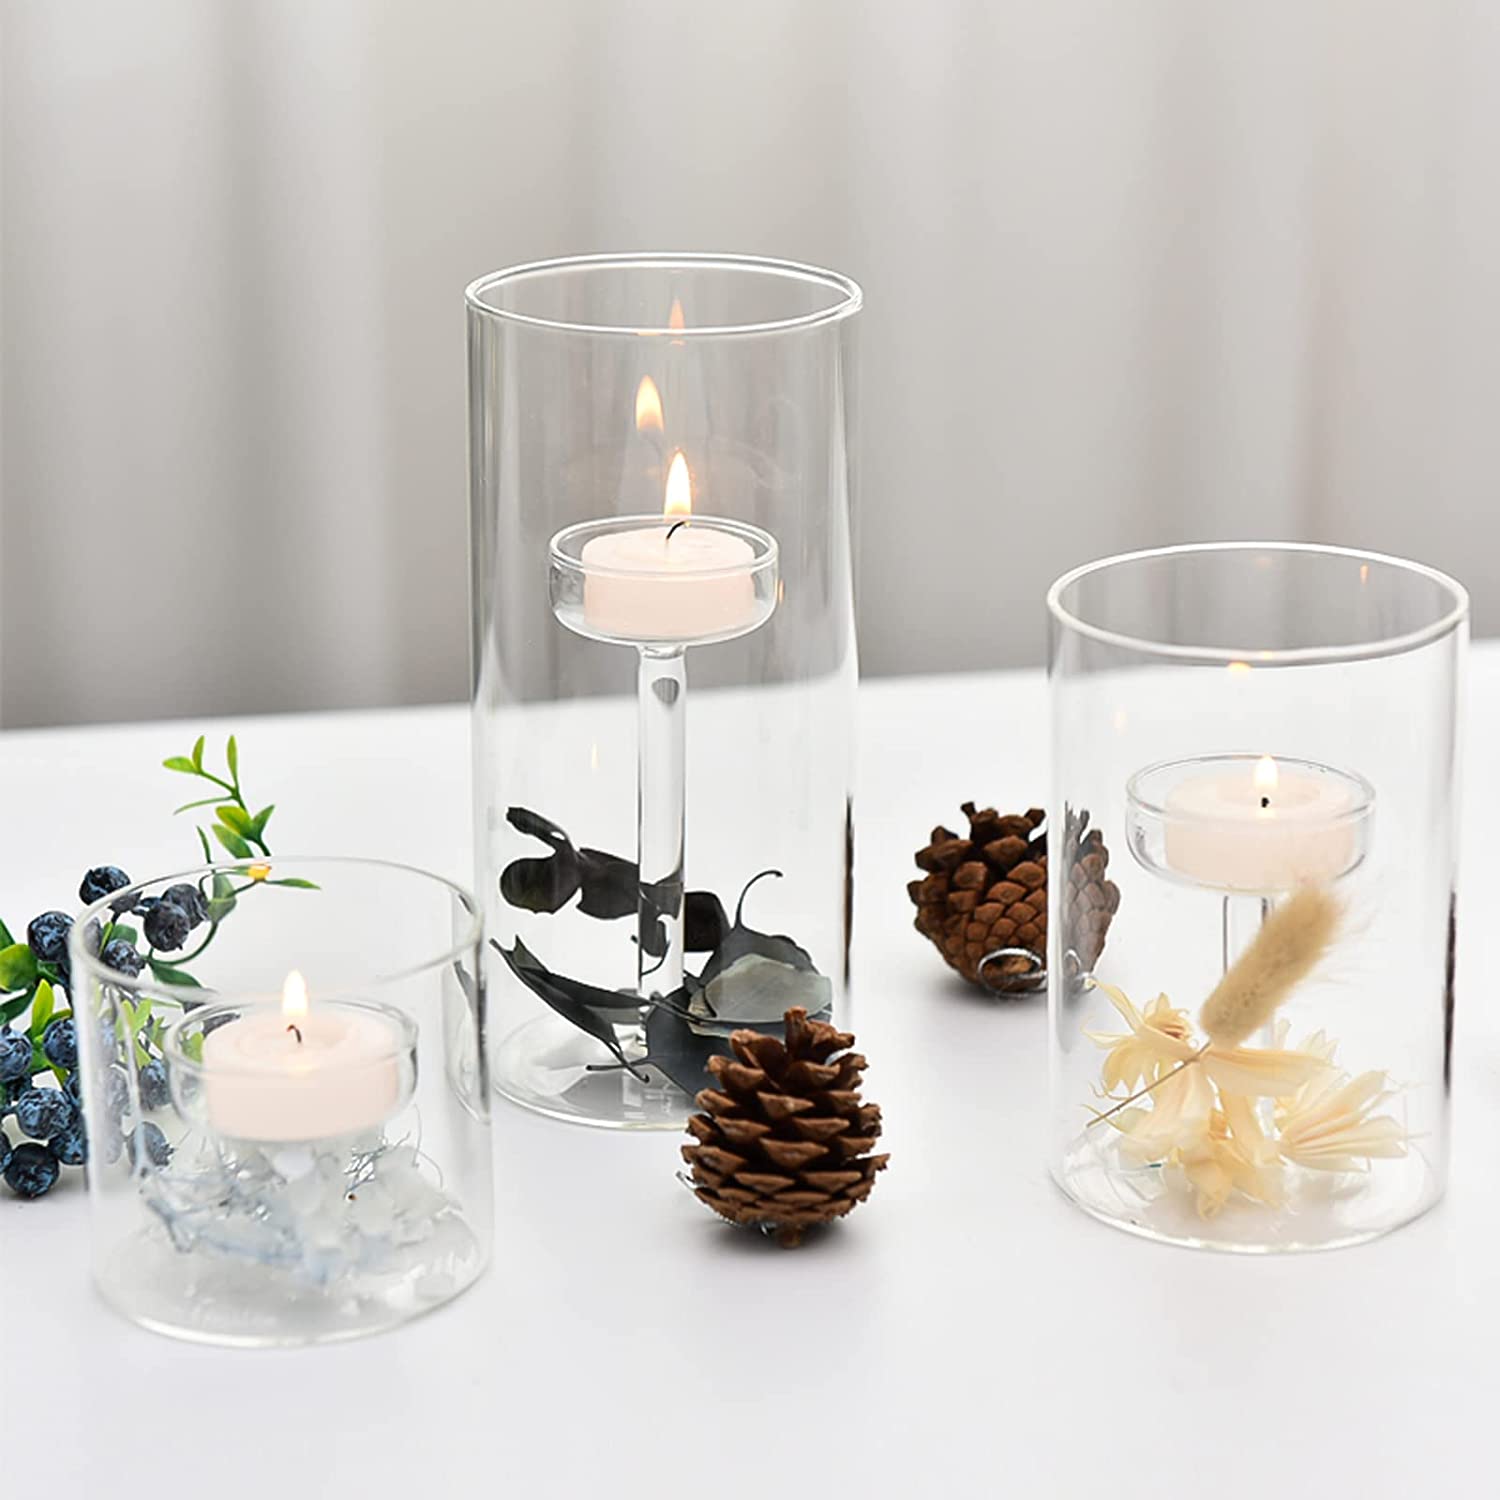 factory low price Pine Wood Box - Glass Hurricane Candle Holder for Pillar Candles – Glass Cylinder Vase for Centerpieces Clear Seeded Home Decor for Kitchen Table Living Room – Shunstone